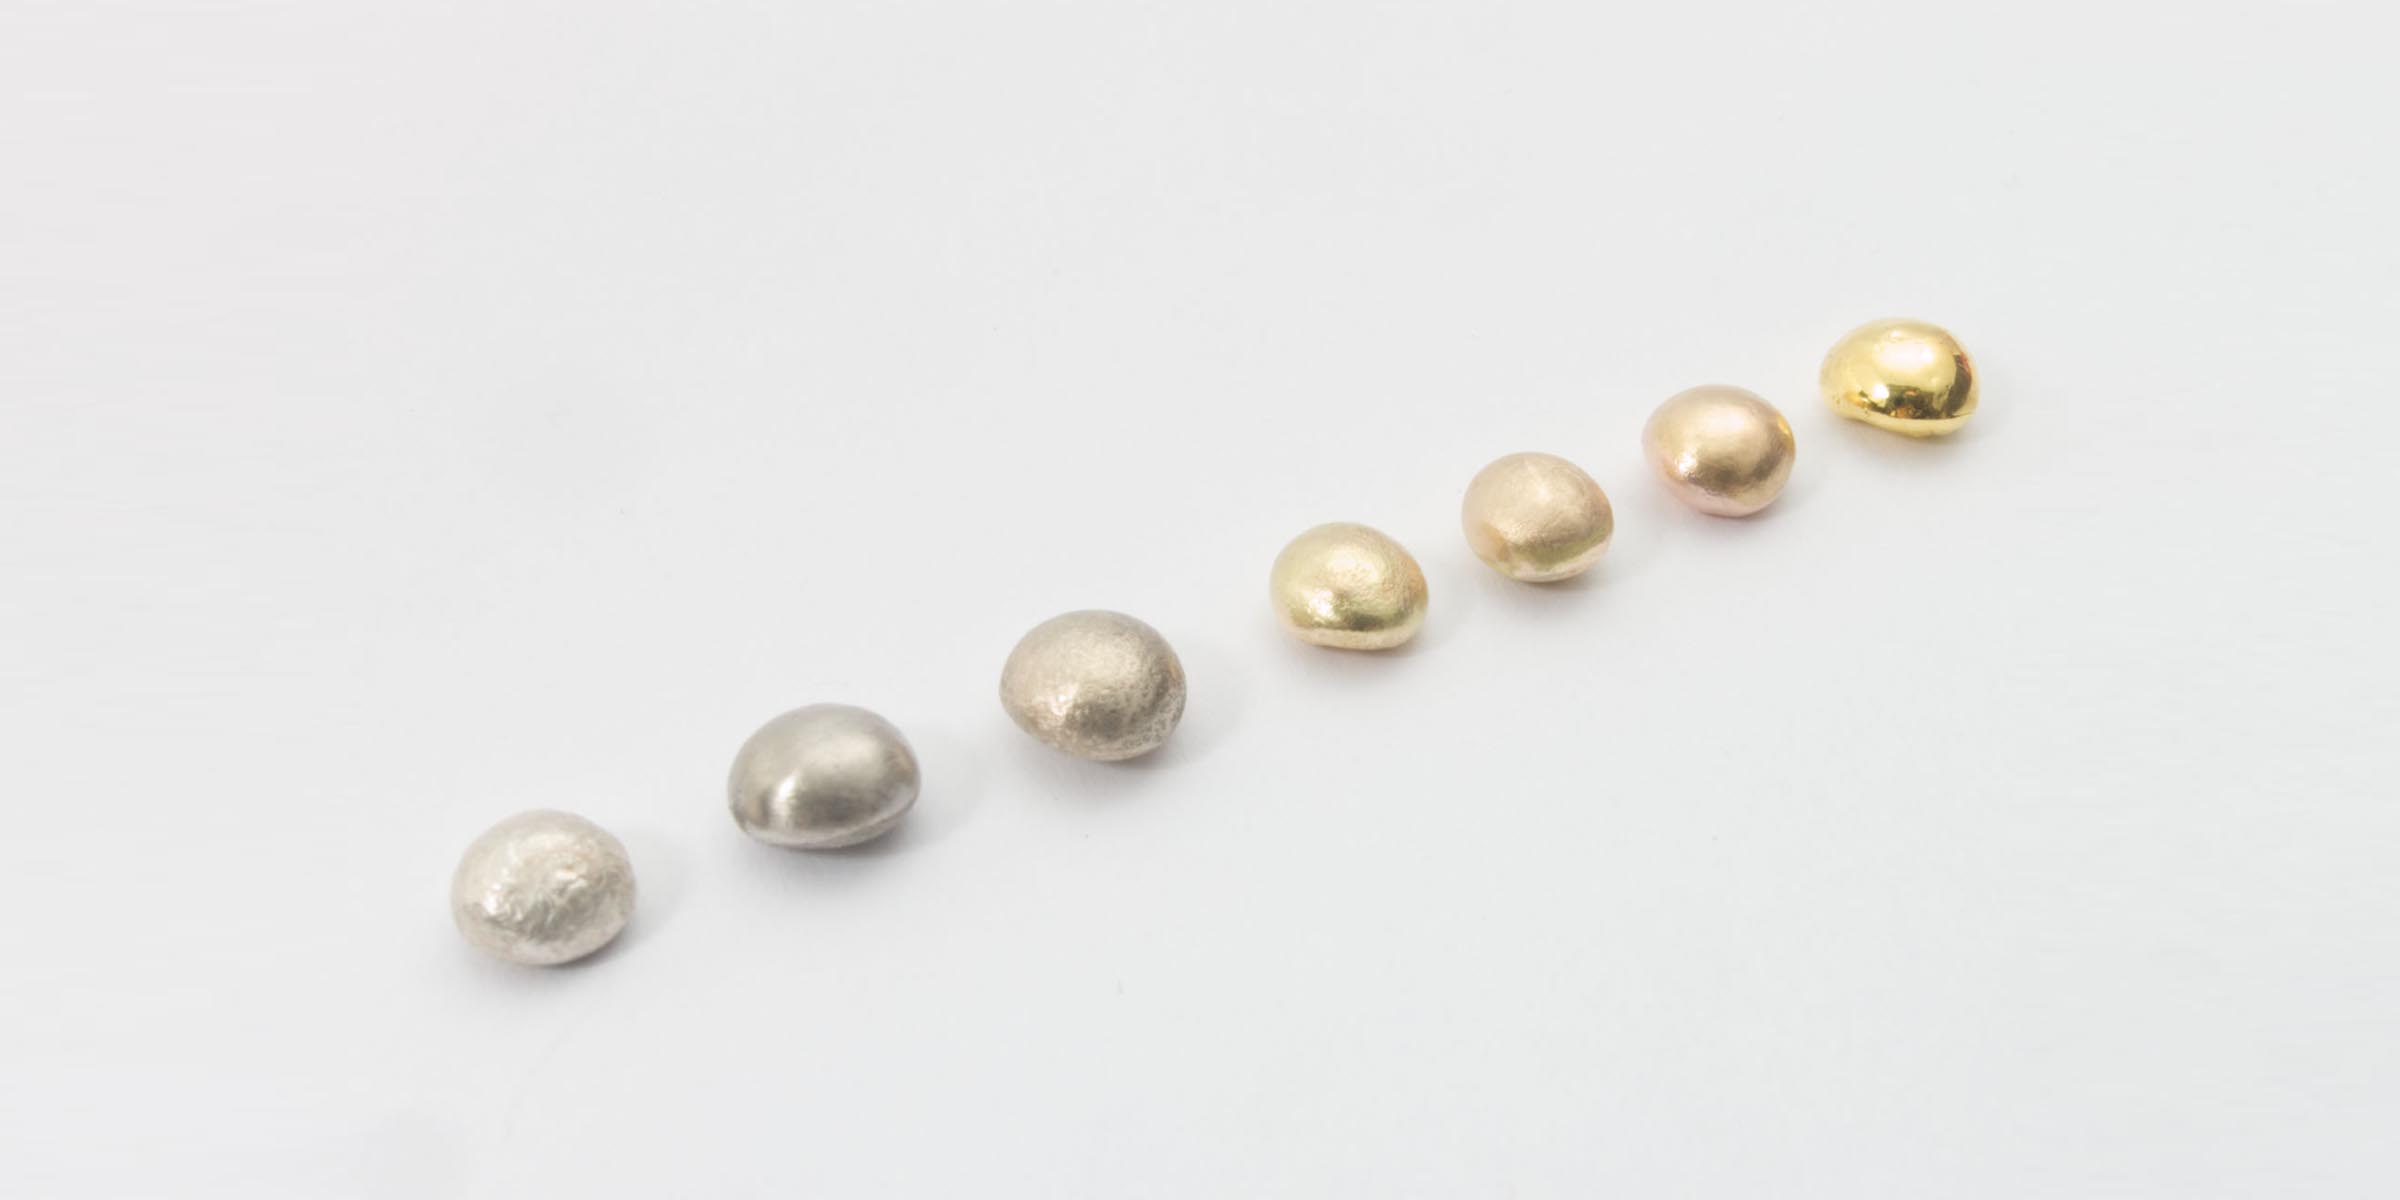 Golden Pearls: Complete Buying Guide, Meaning, Uses, Properties & Facts